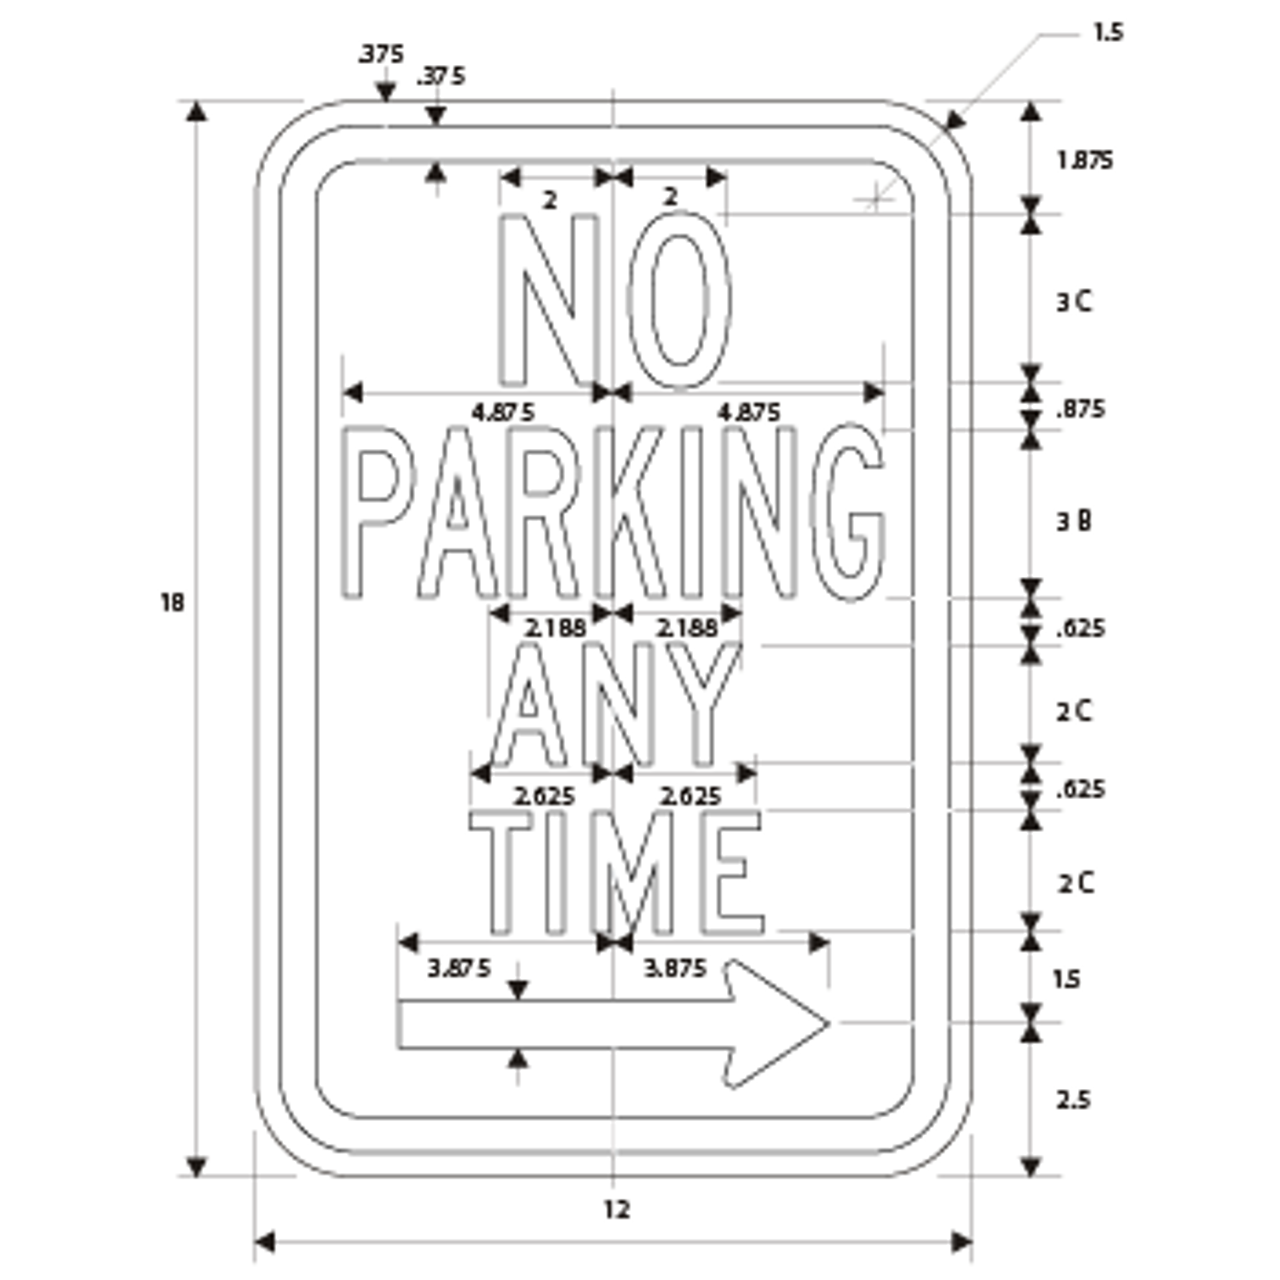 NO PARKING ANYTIME
SKU# X-SIGN-R7
DIMENSIONS RIGHT ARROW